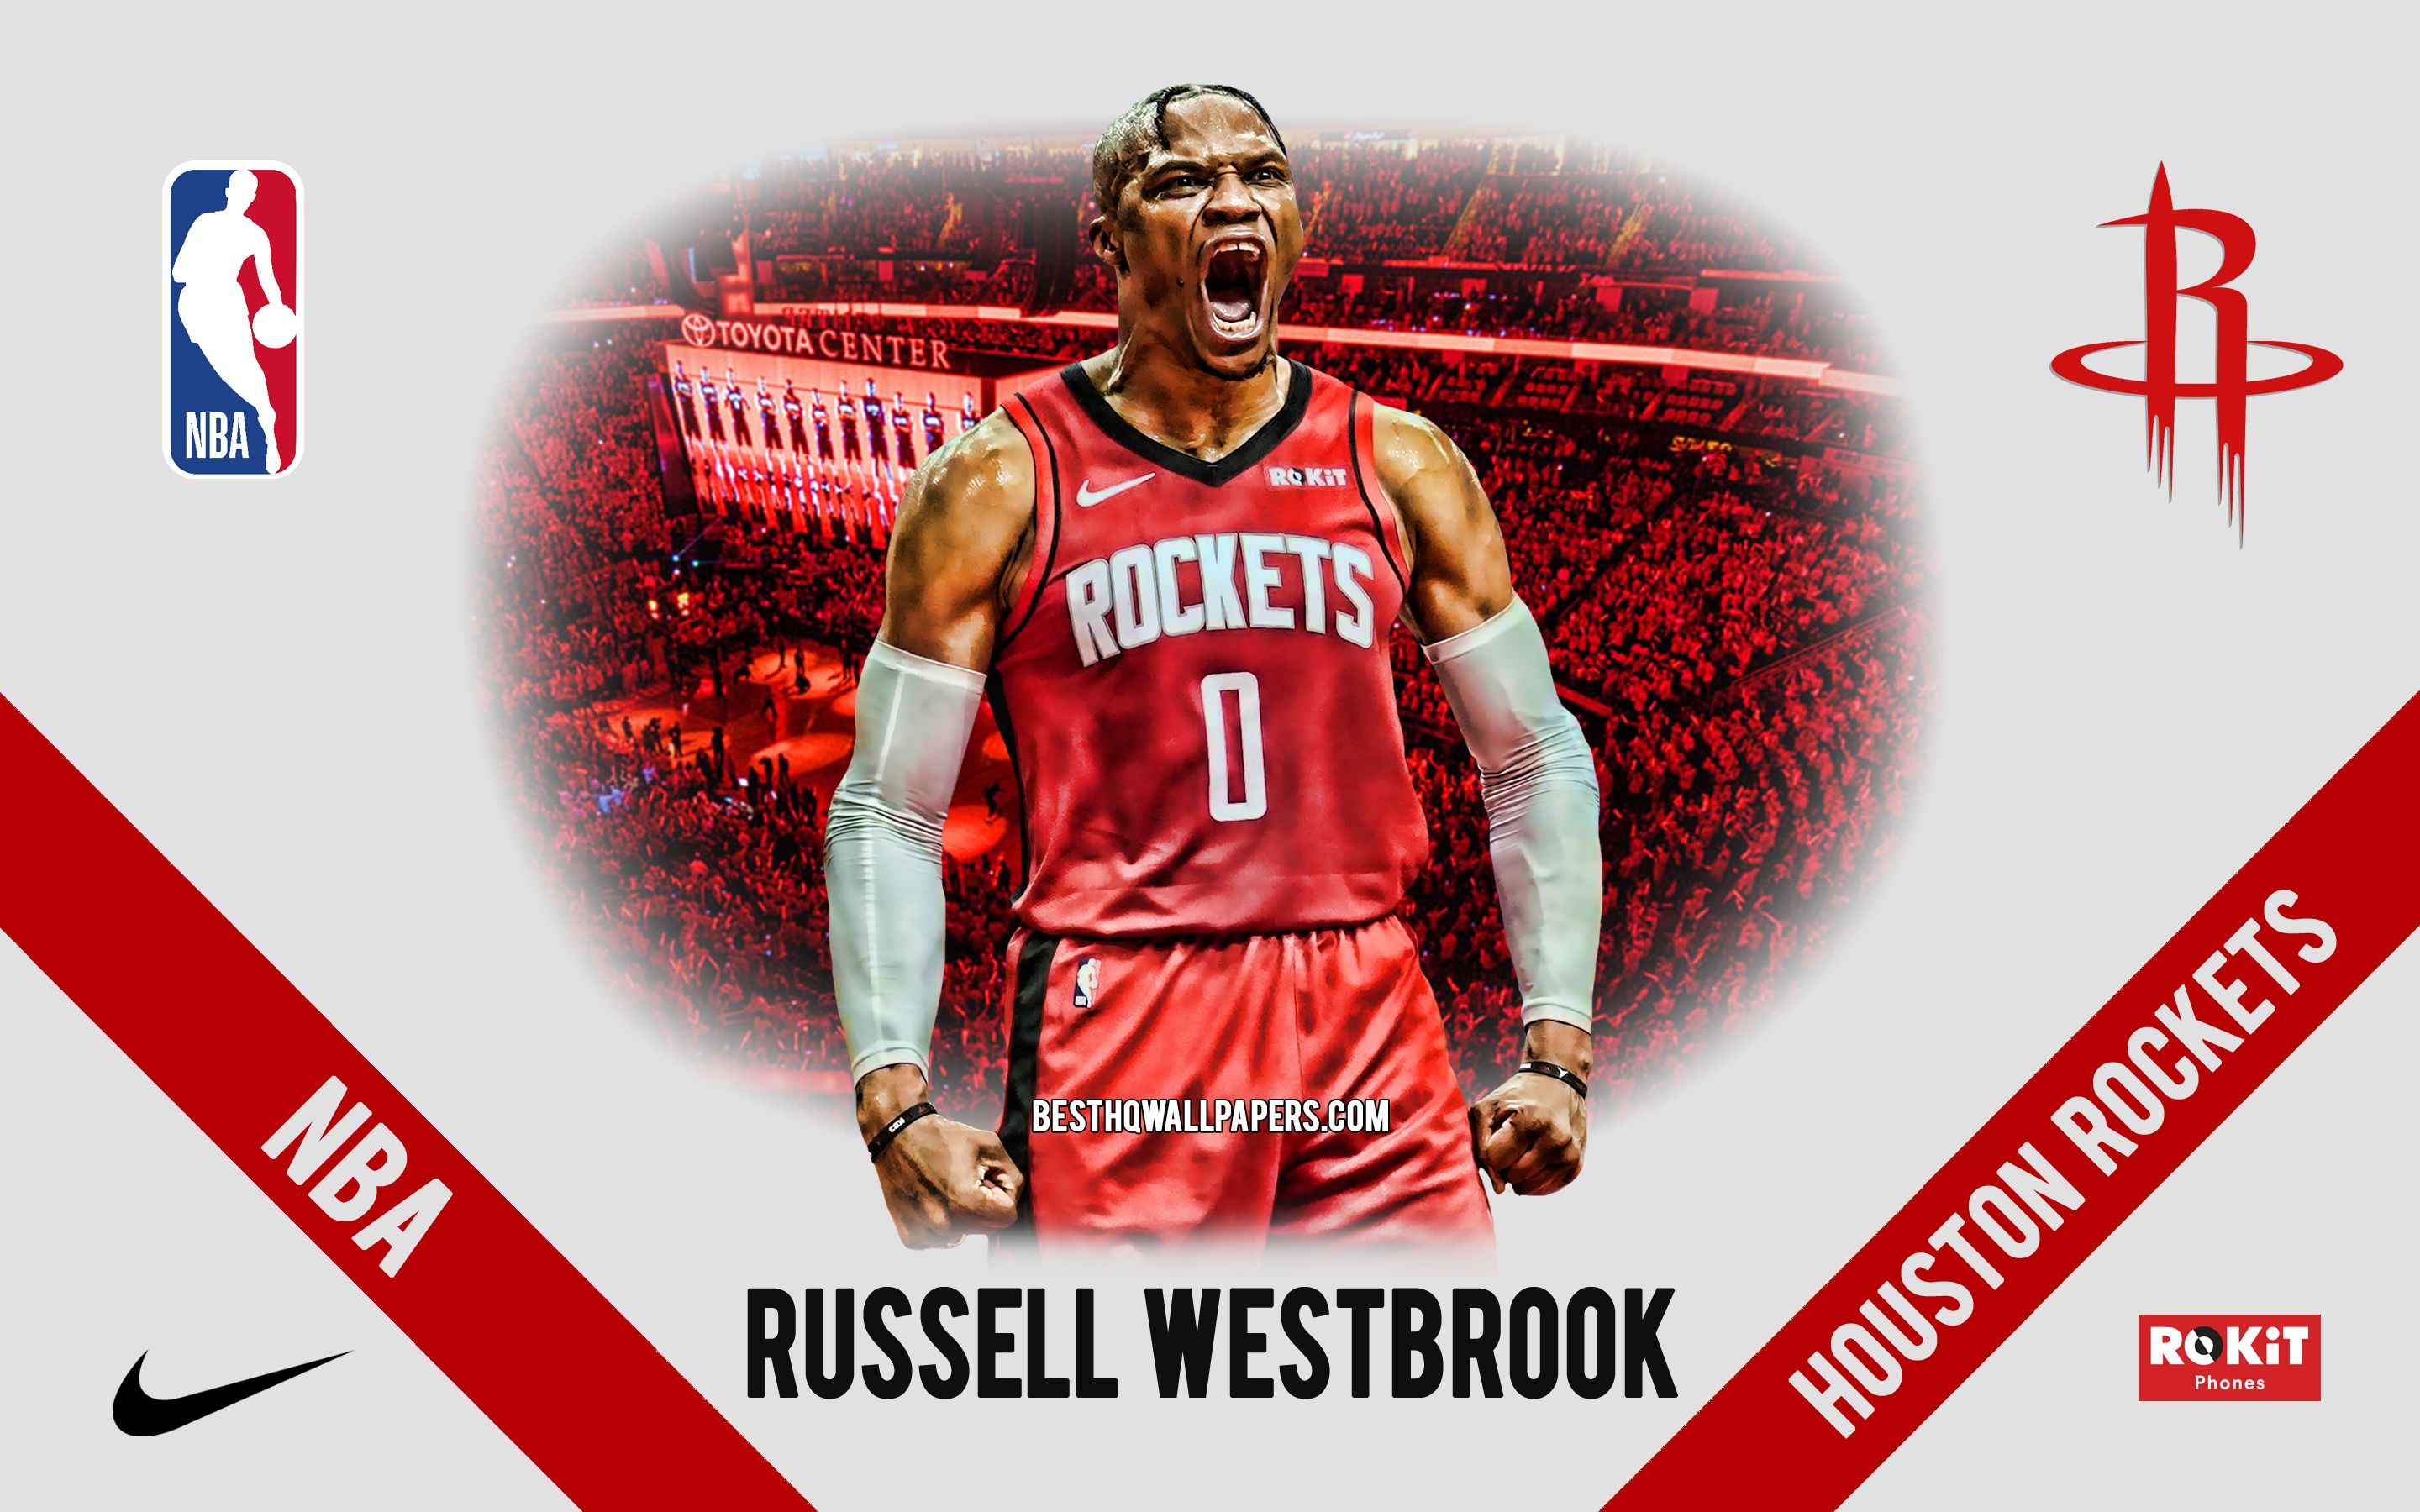 Download wallpaper Russell Westbrook, Houston Rockets, American Basketball Player, NBA, portrait, USA, basketball, Toyota Center, Houston Rockets logo for desktop with resolution 2880x1800. High Quality HD picture wallpaper